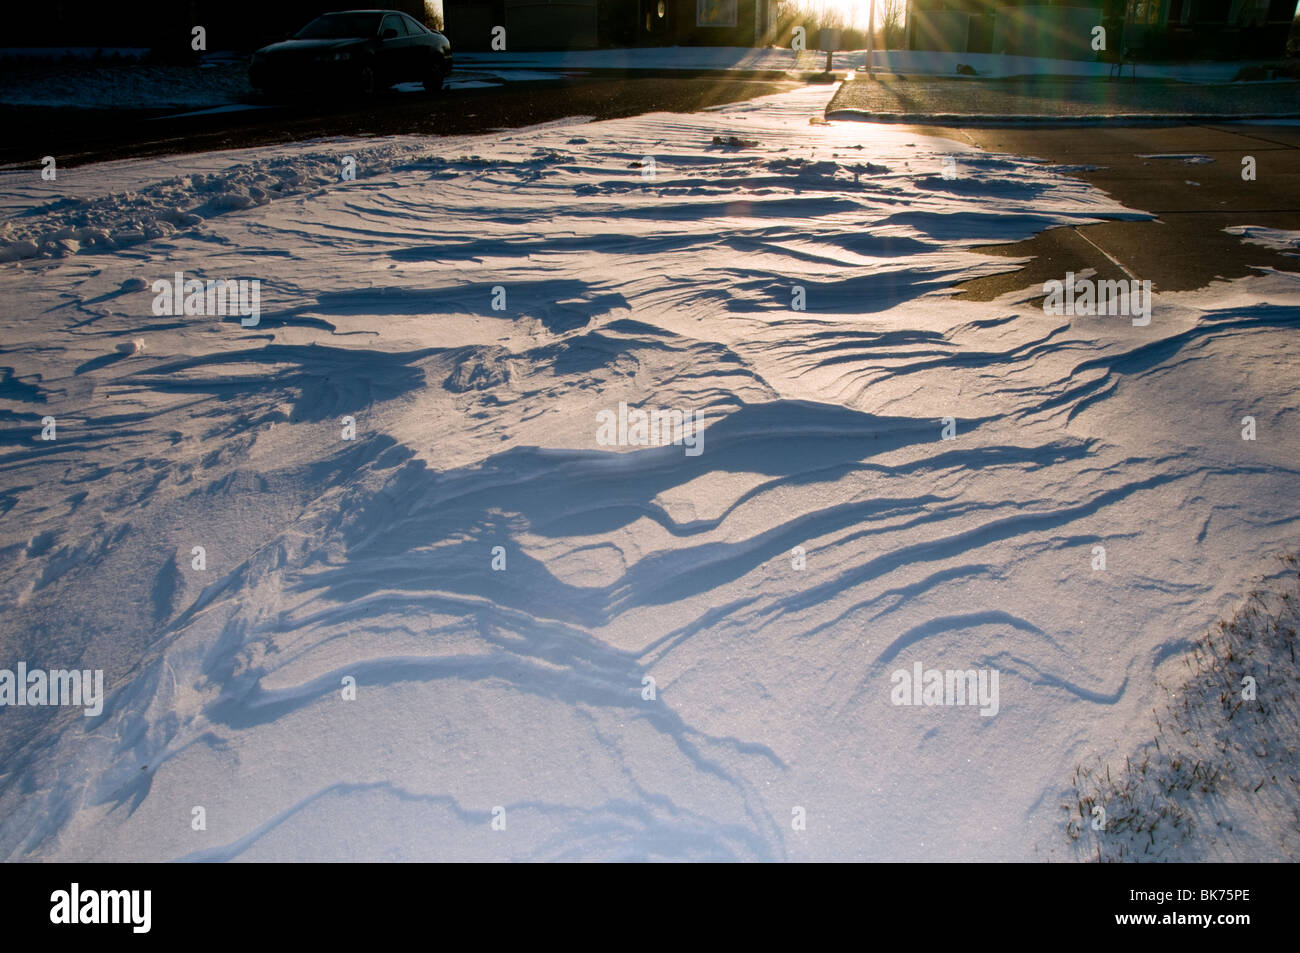 Wind driven patterns of snow in a street after blizzard conditions in Wichita, Kansas, USA. Stock Photo